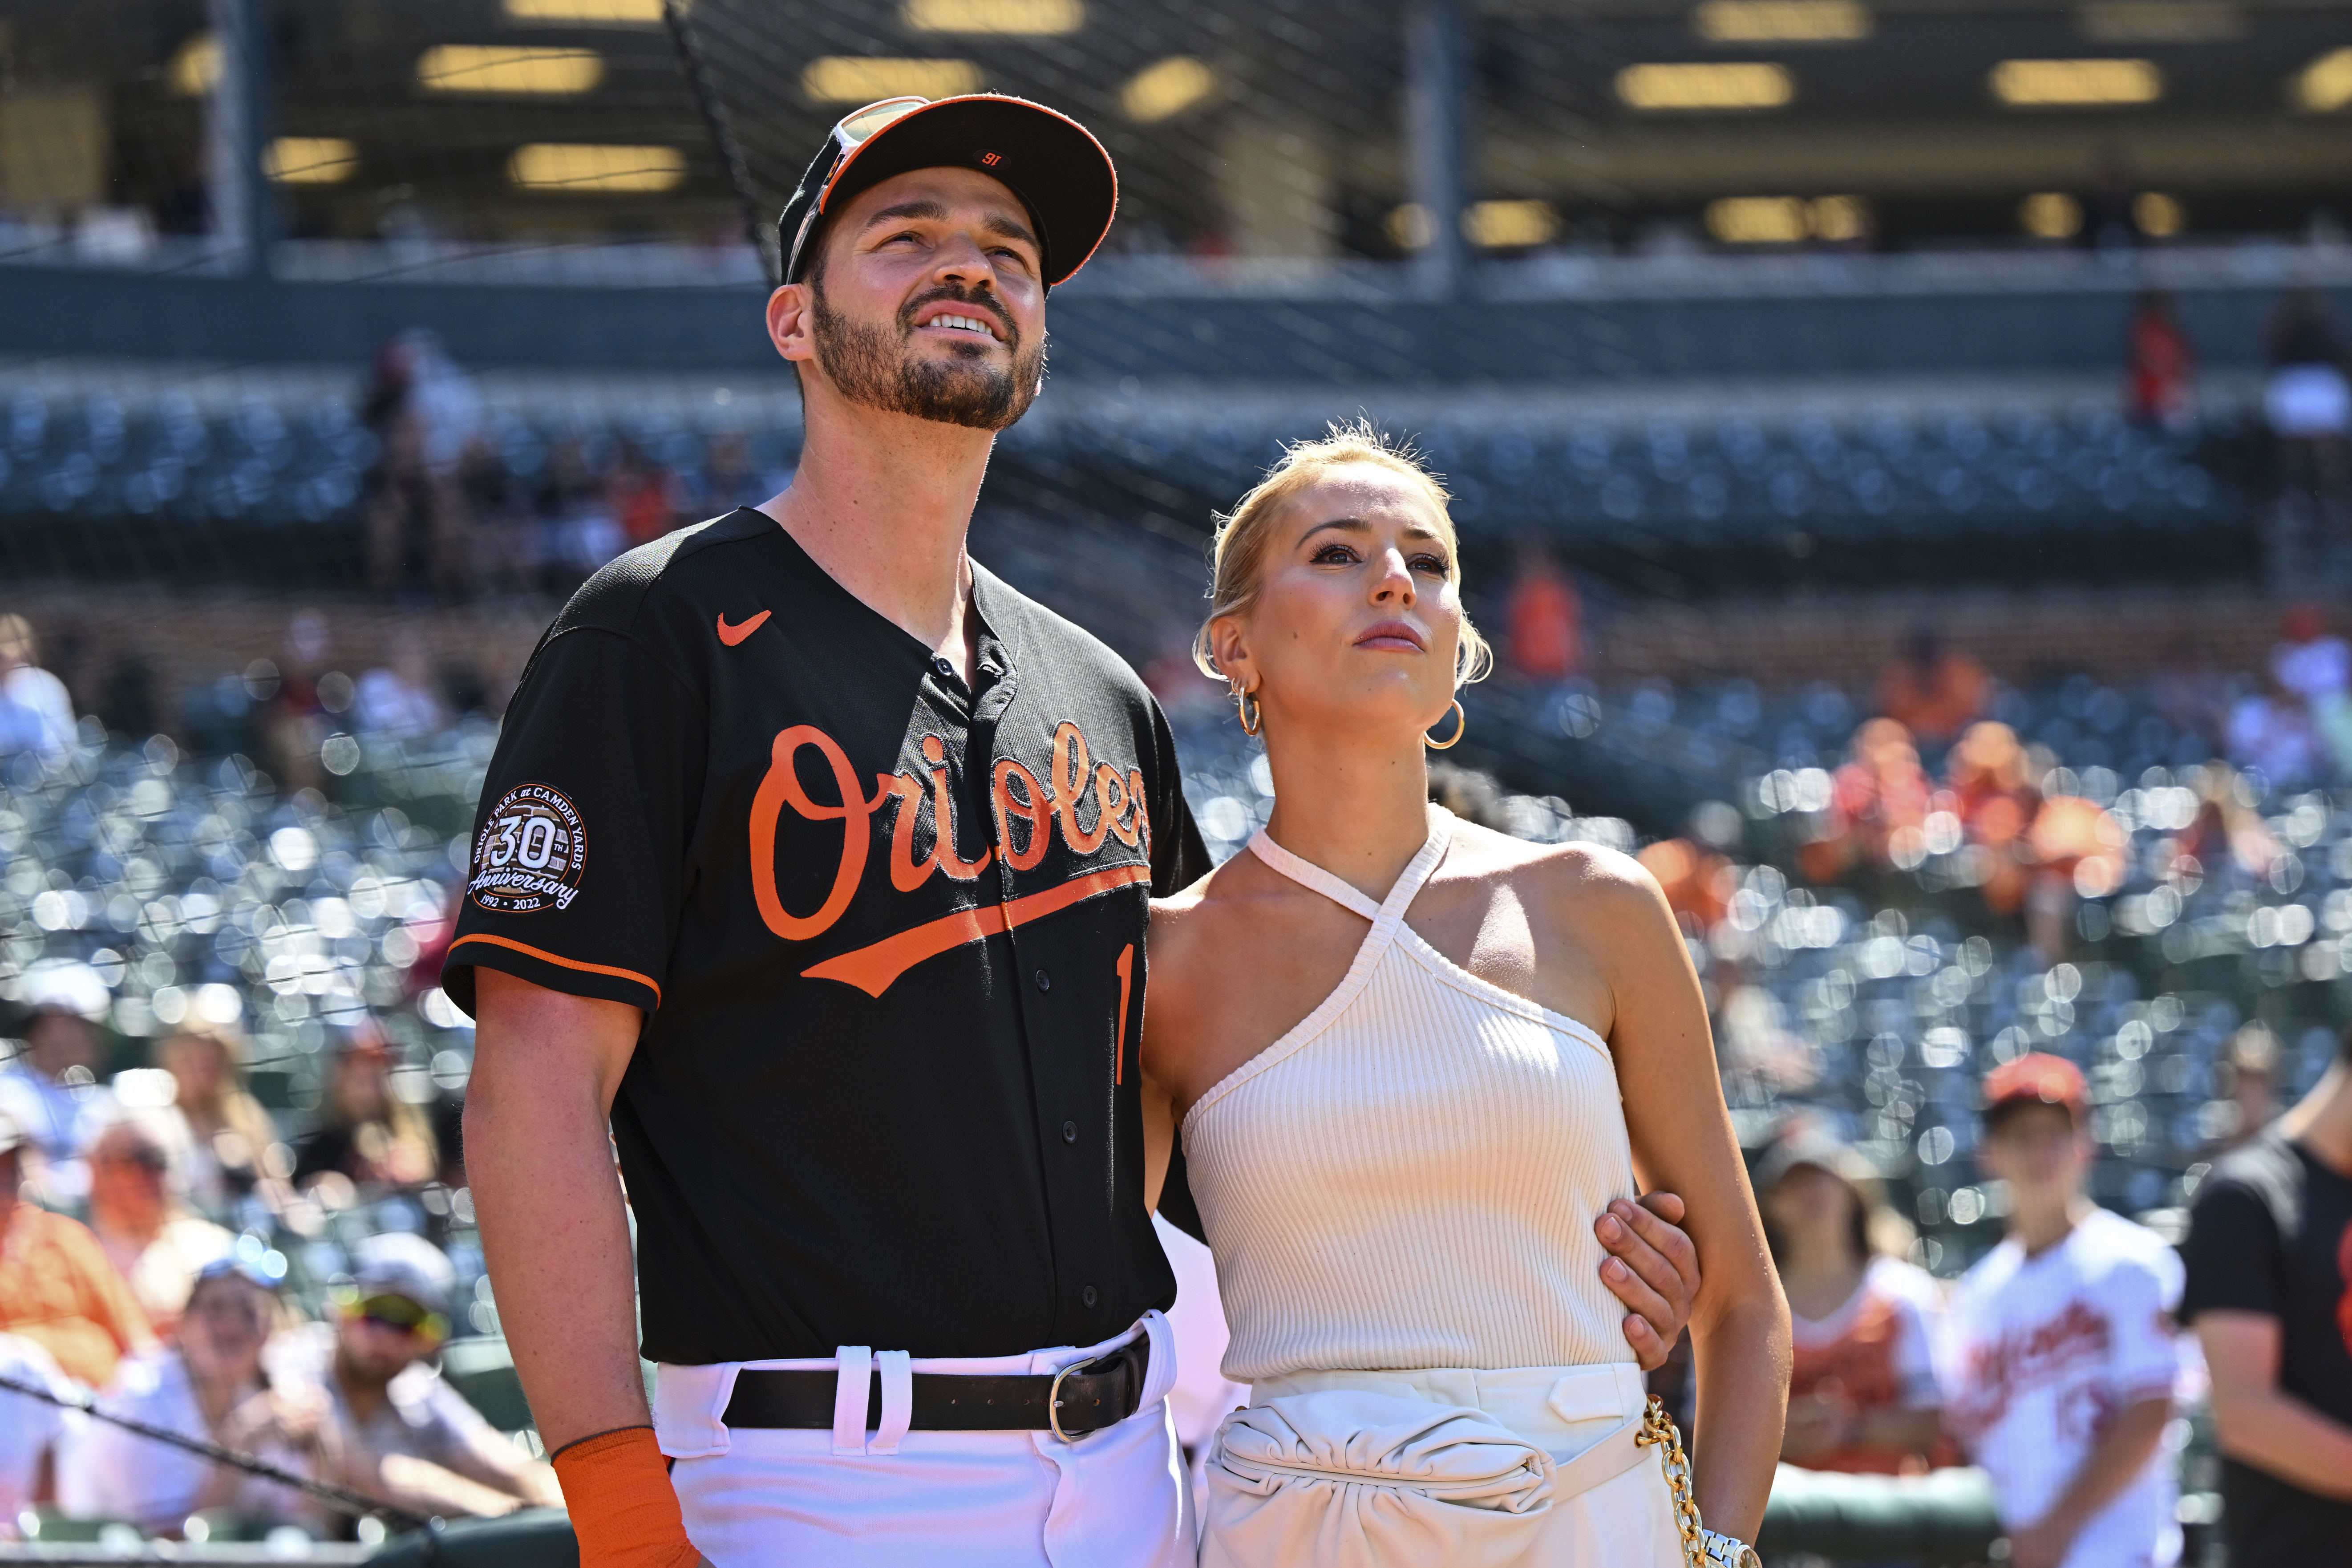 Trey Mancini, fiancee Sara Perlman say goodbye to Baltimore: 'It really was  a dream come true for me to play for the Orioles